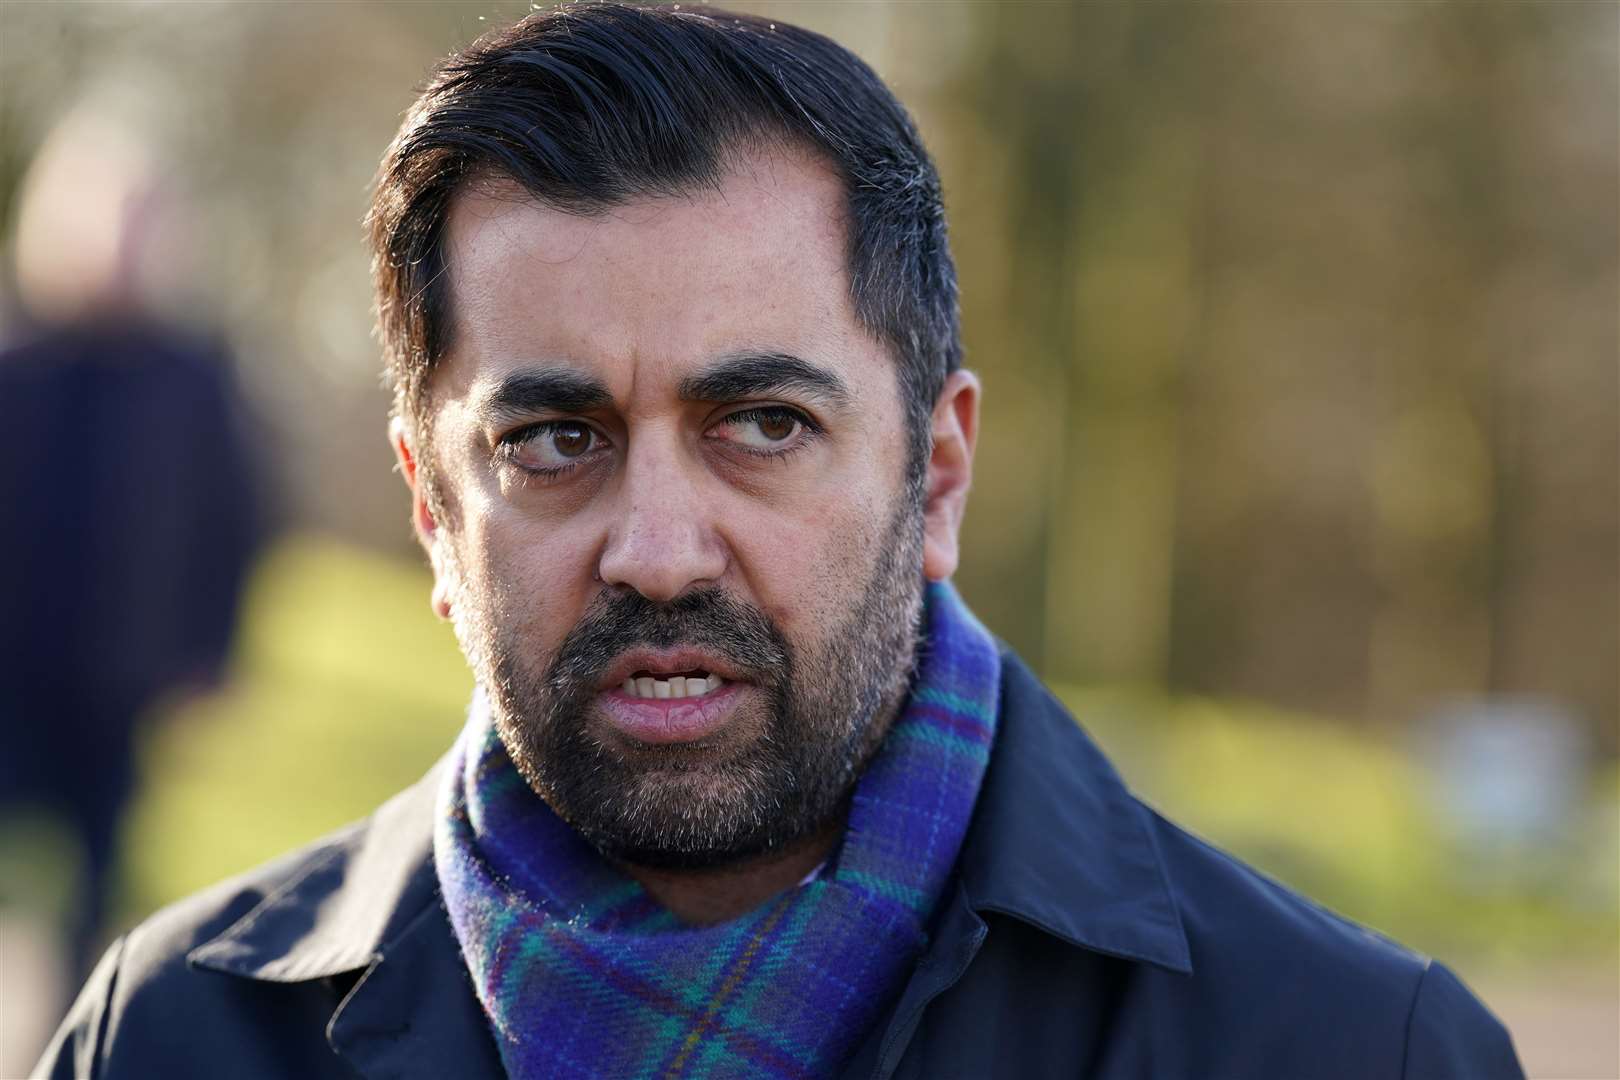 Humza Yousaf said the investigation has ‘clearly’ affected how the public views the SNP (Andrew Milligan/PA)